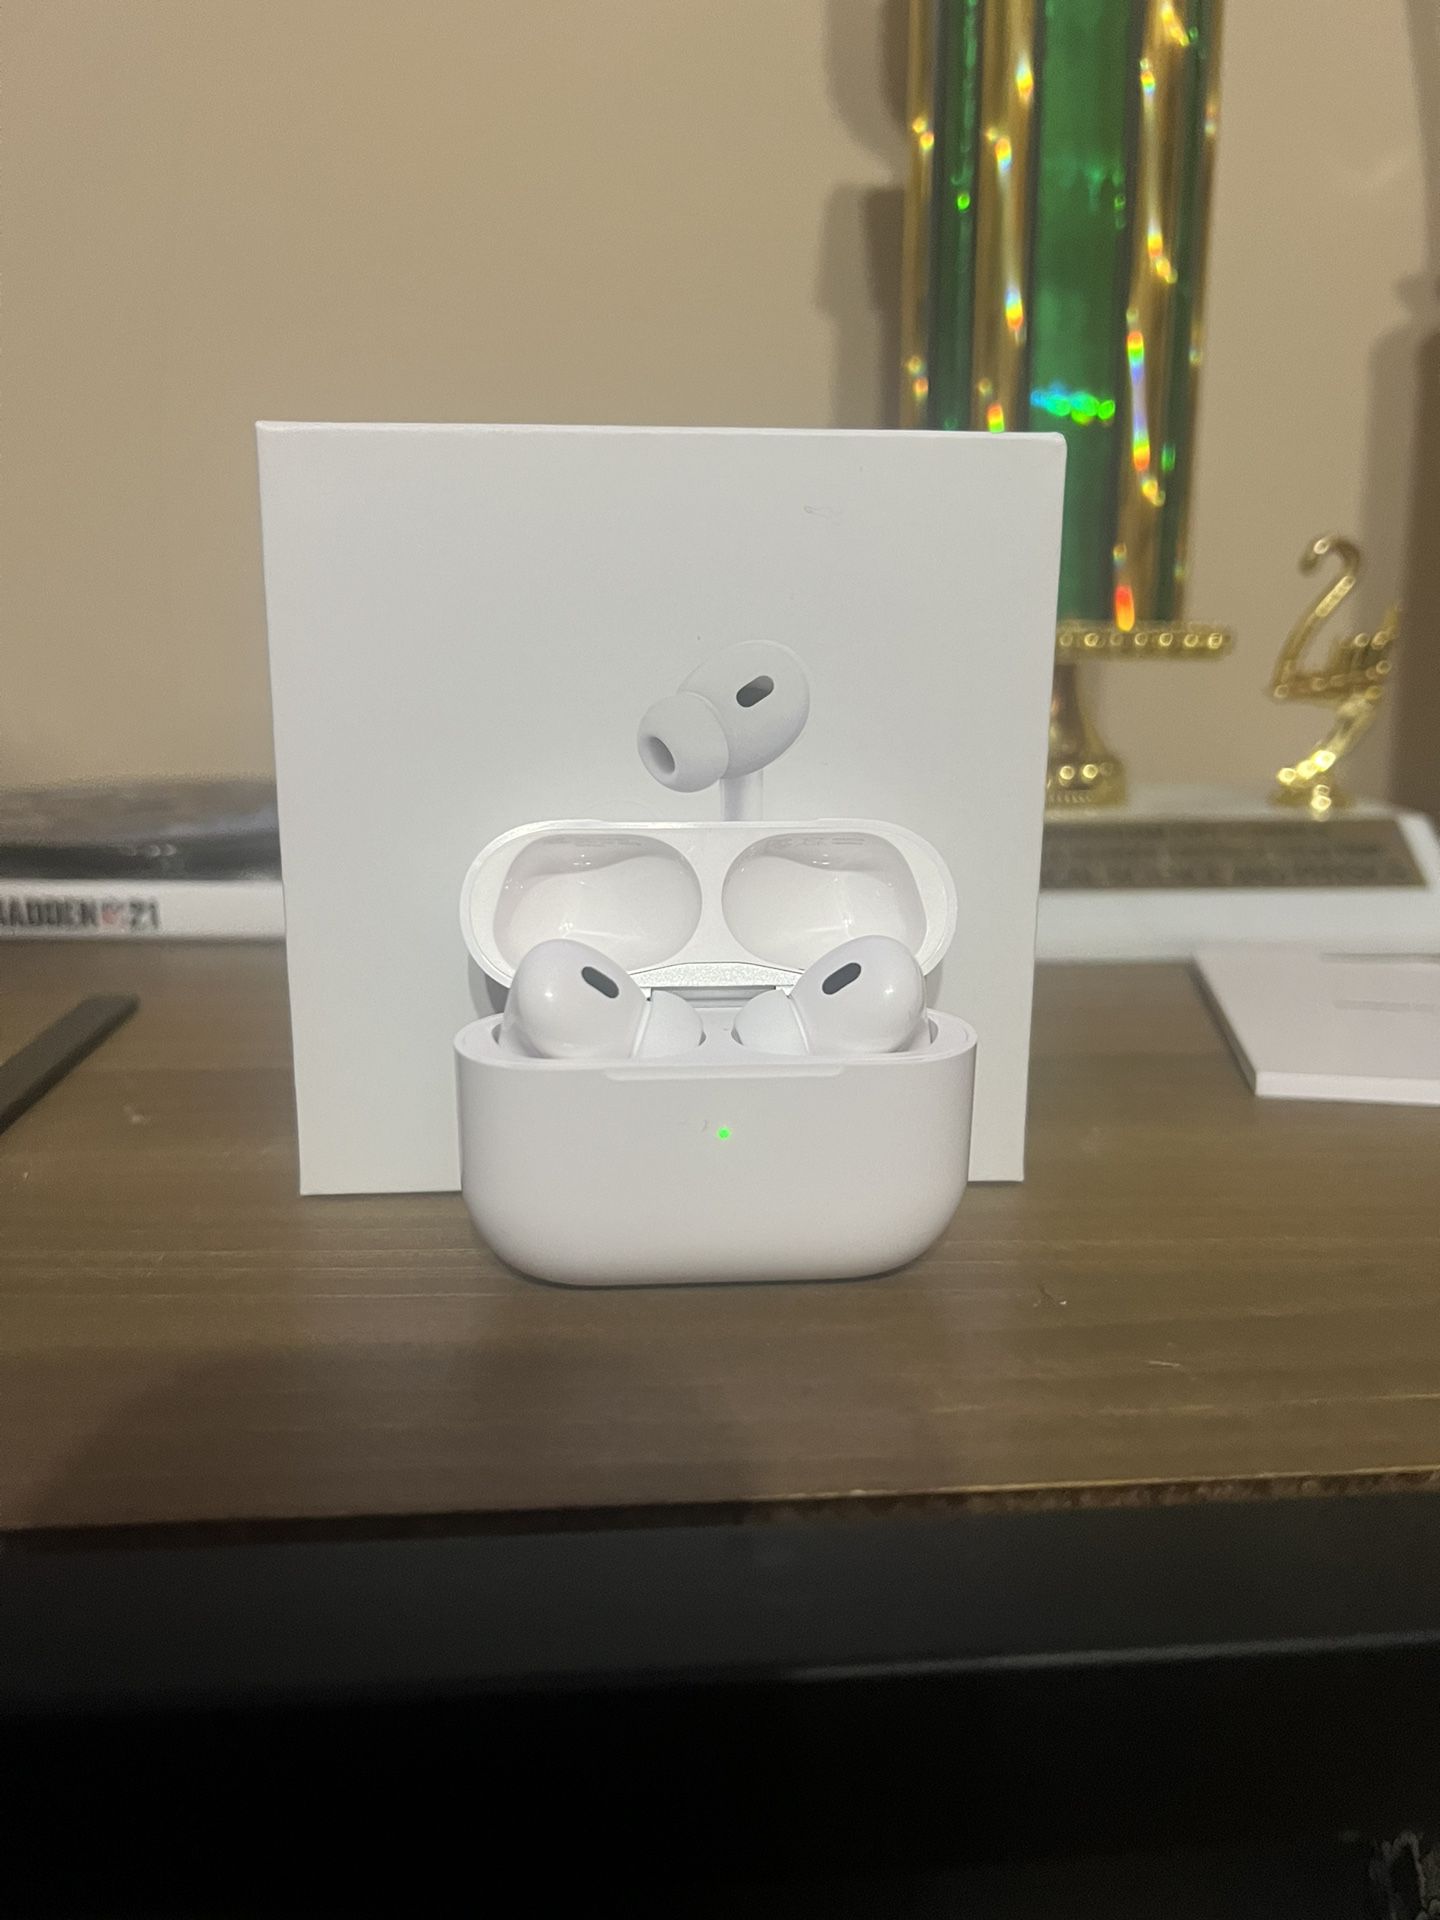 AirPods Gen 2’s w/noise cancellation